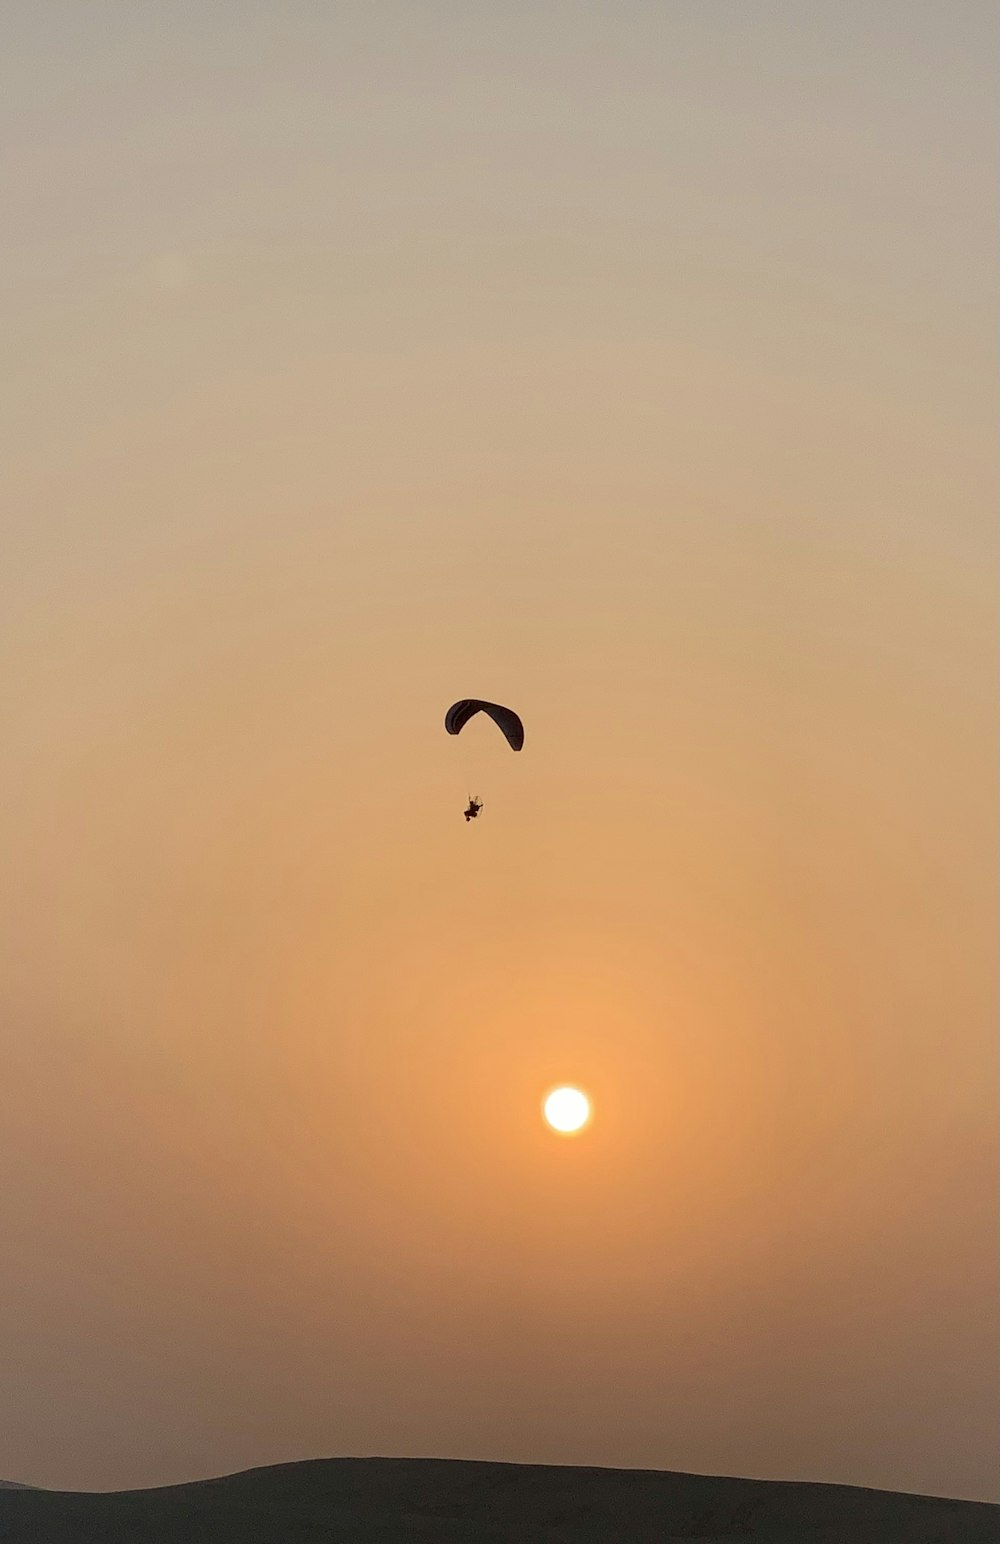 a kite flying in the sky at sunset